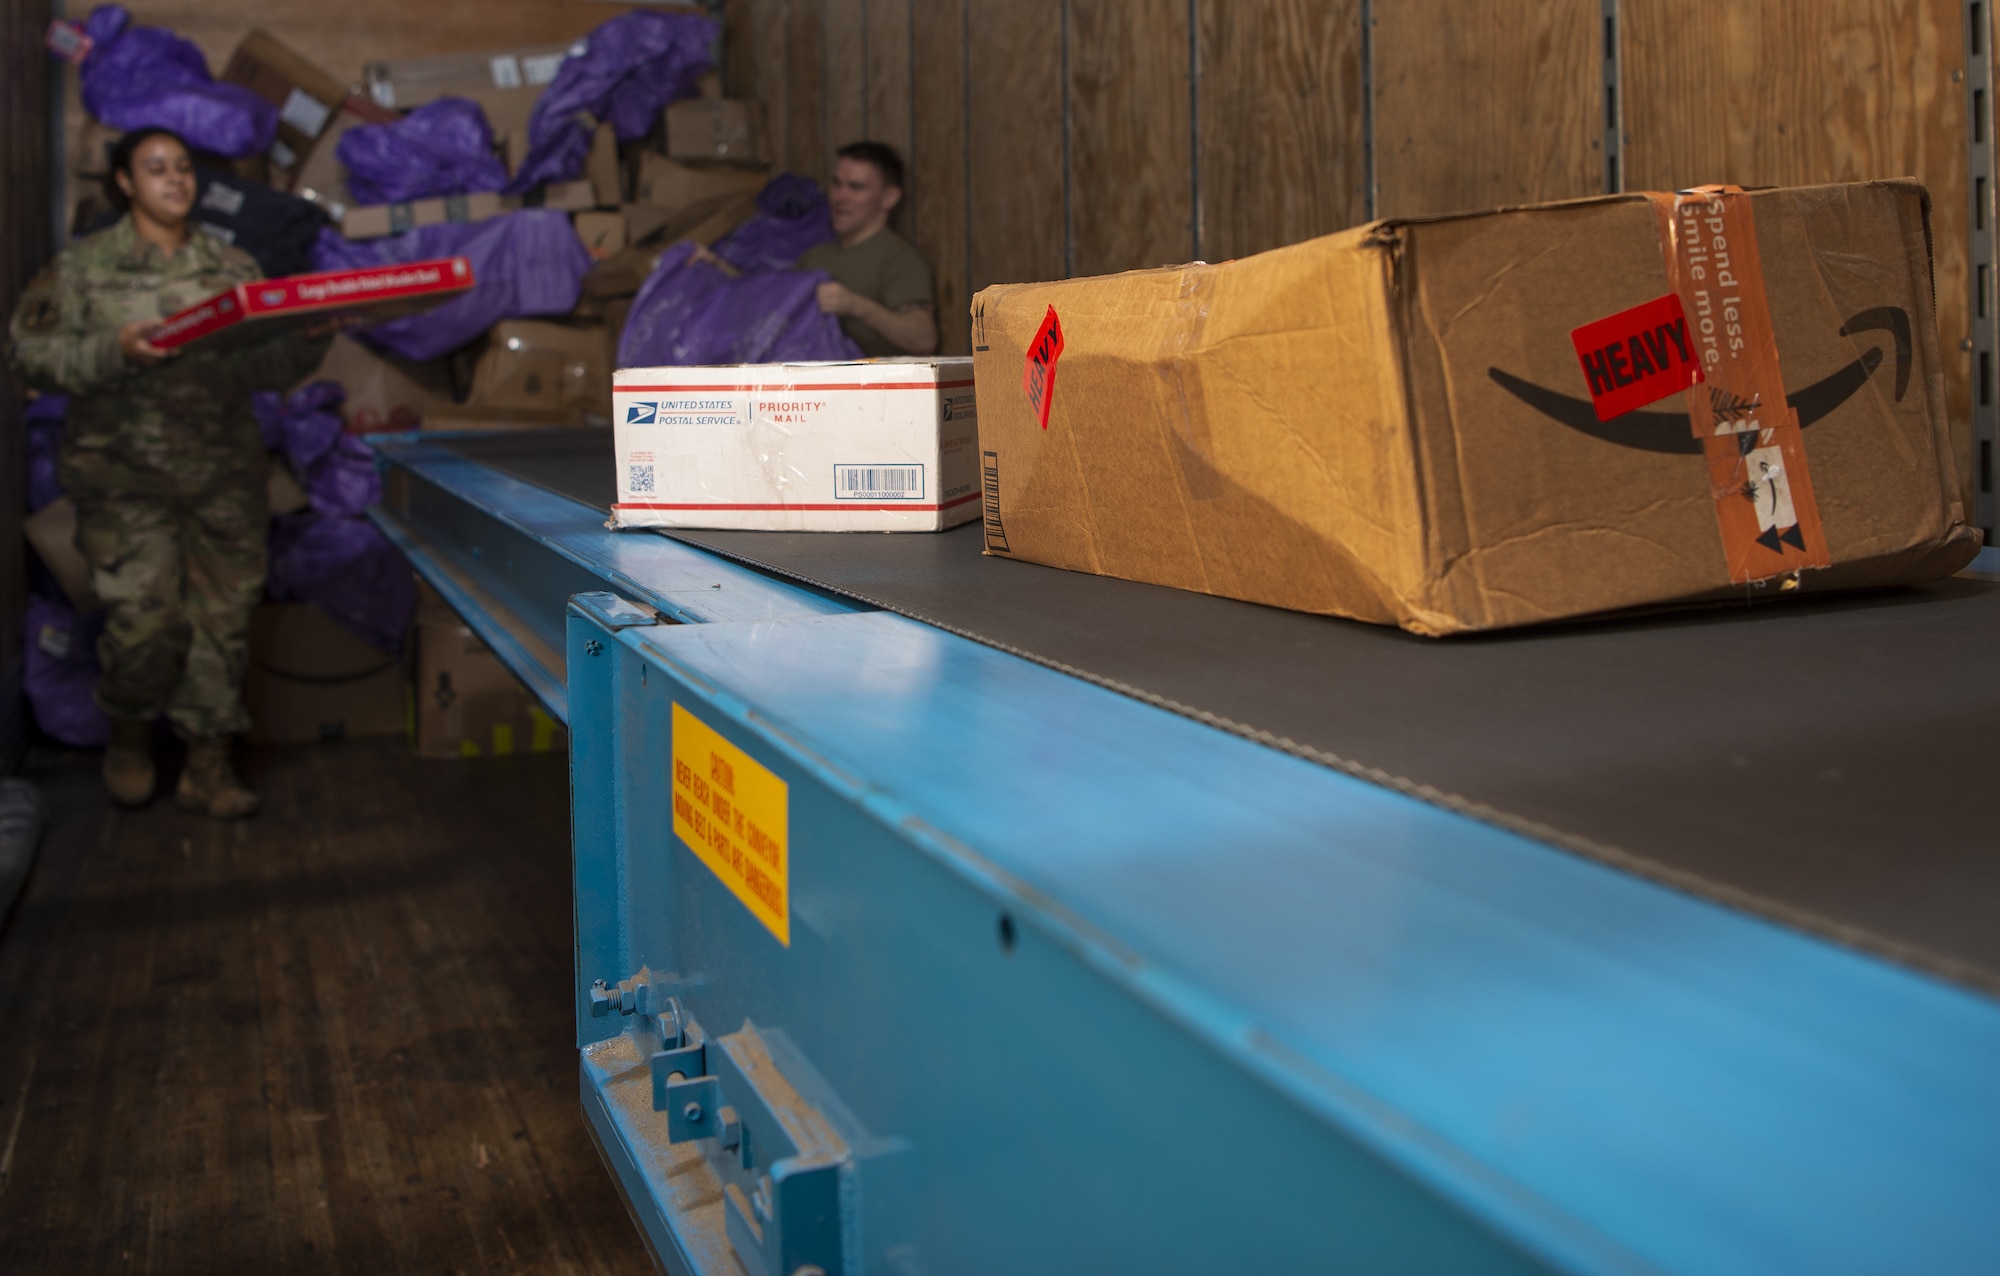 Packages move down a conveyer belt as part of the Pacific Air Forces Air Postal Squadron’s sorting and inspection process Dec. 8, 2021, at Yokota Air Base, Japan. During the holidays, members of the PACAF AIRPS integrate an additional transport vehicle to their daily operations to ensure increased an increased flow of mail can be sorted and delivered across the region. The squadron oversees operations for a transportation flight and 11 locations across the Pacific to serve more than 355,000 patrons across U.S. Indo-Pacific Command.